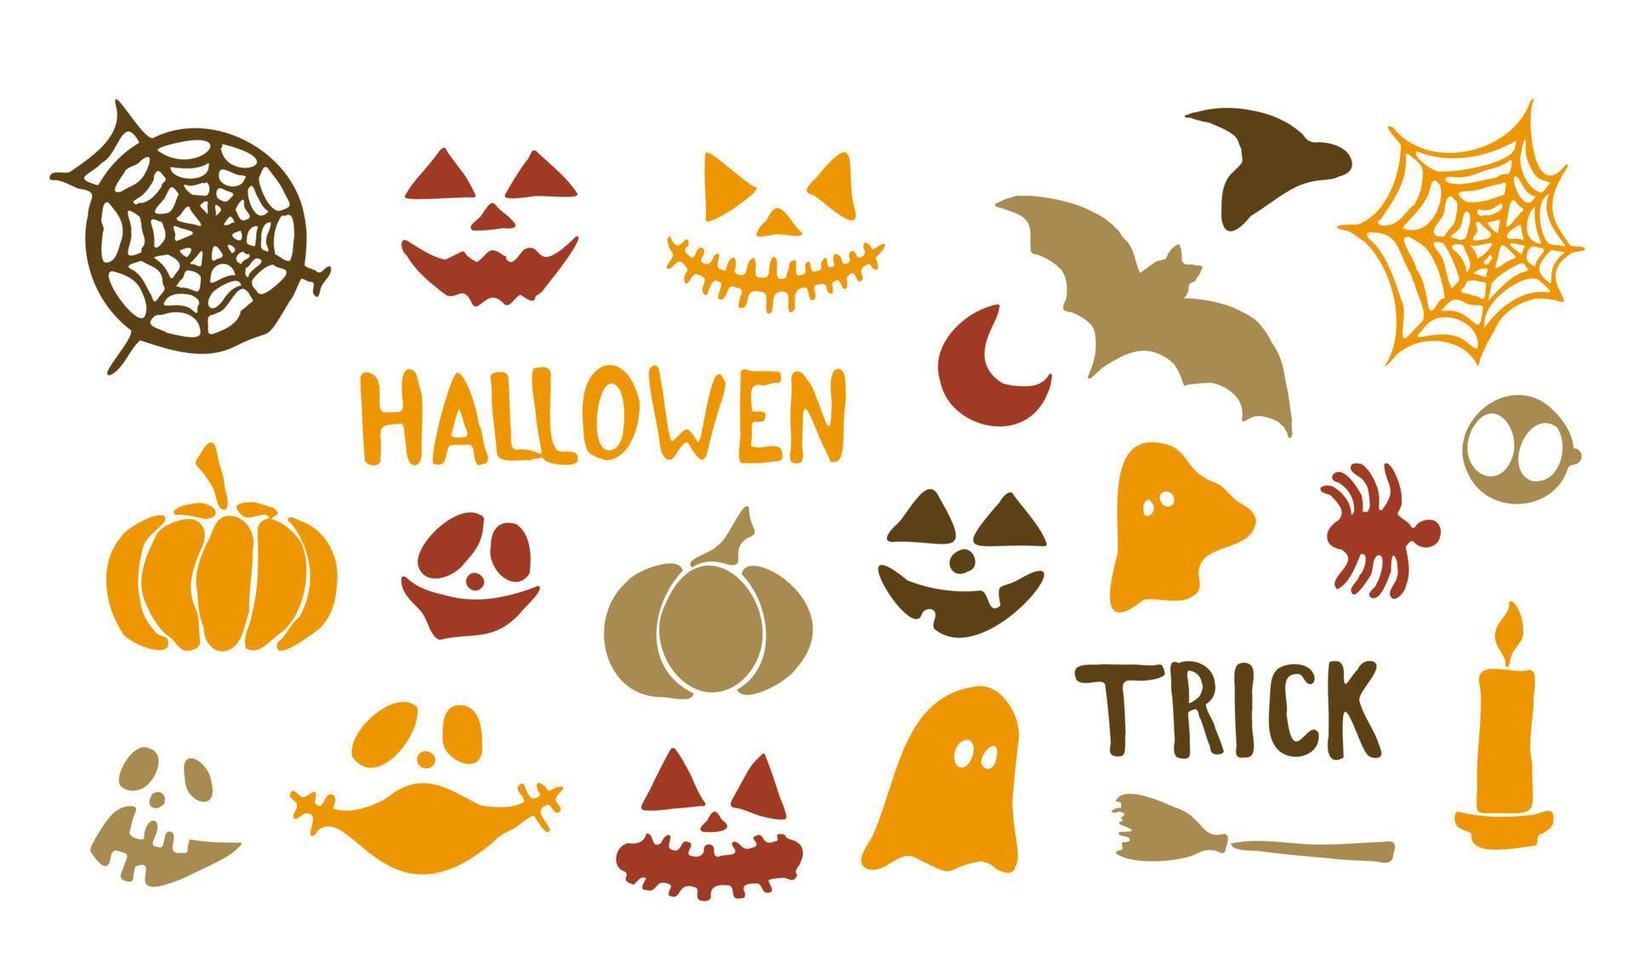 Halloween party doodle style elements. Hand drawn vector illustration.  Cute element for greeting cards, posters, stickers and seasonal design